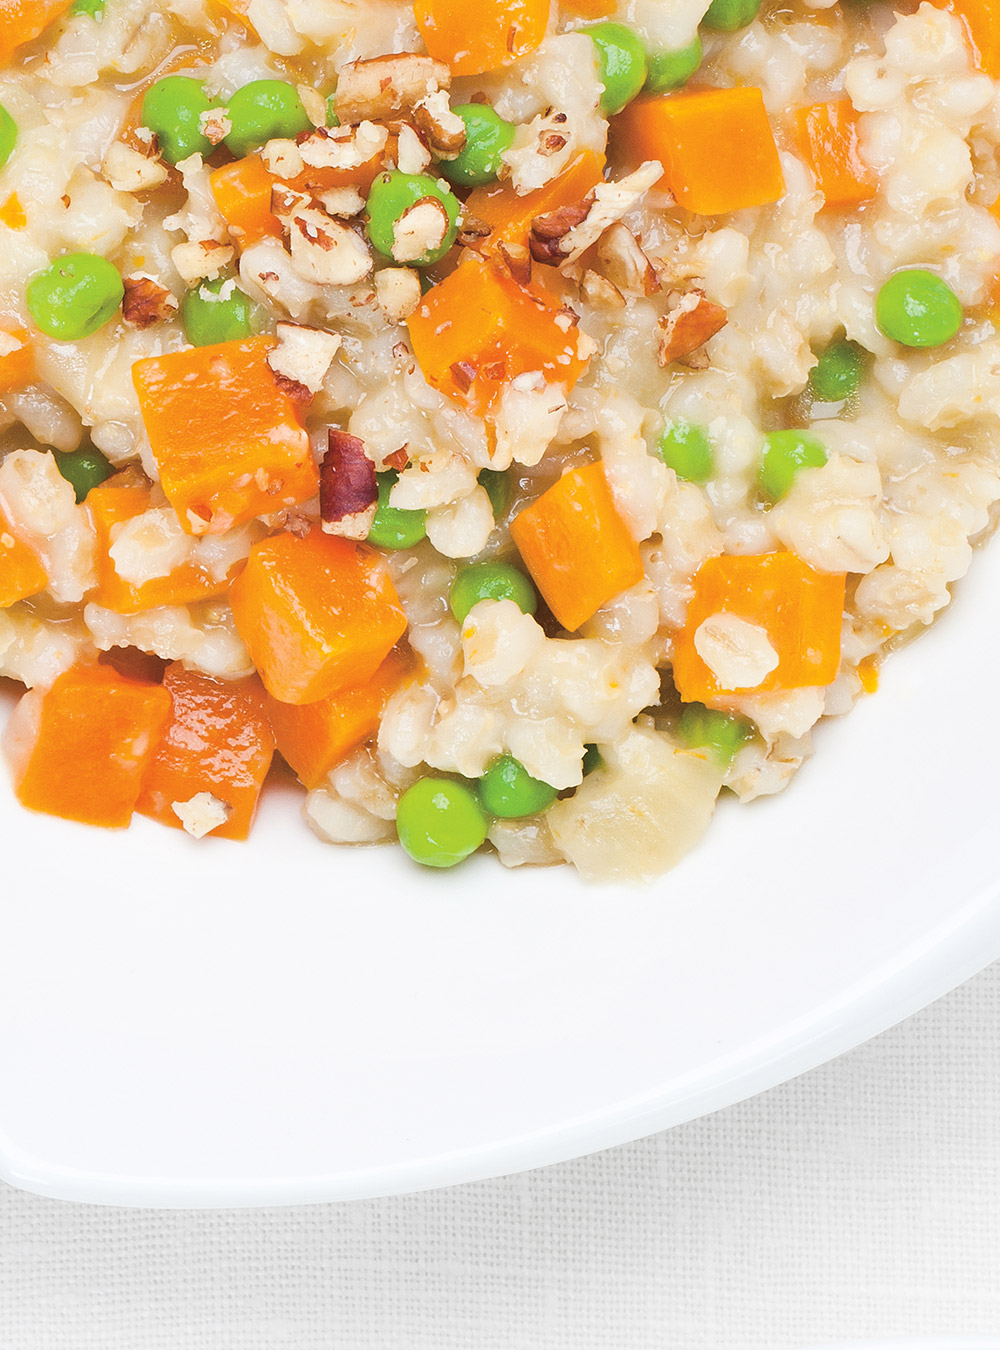 Barley Casserole with Vegetables and Cheddar